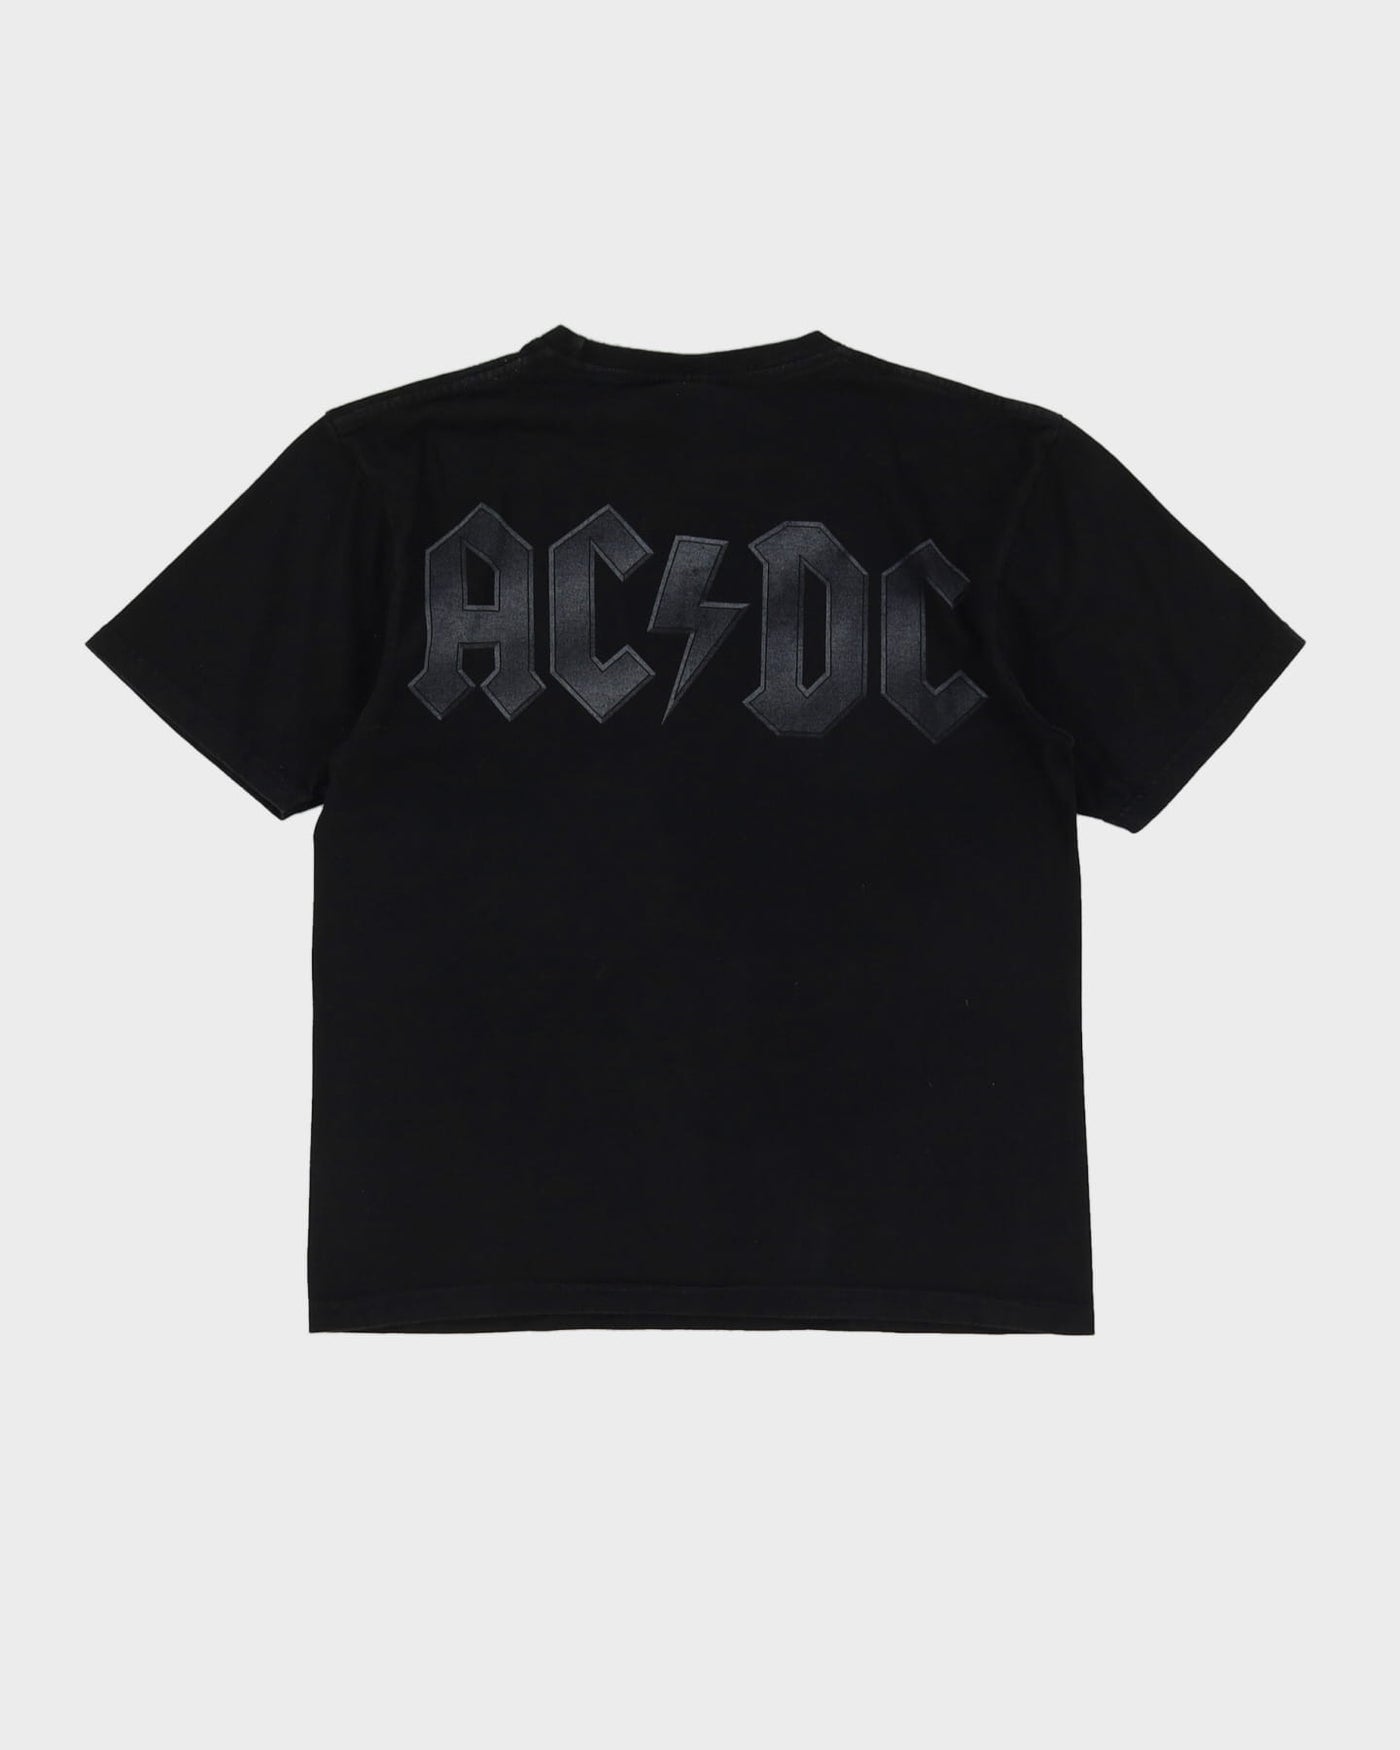 00s ACDC Black Graphic Band T-Shirt - S